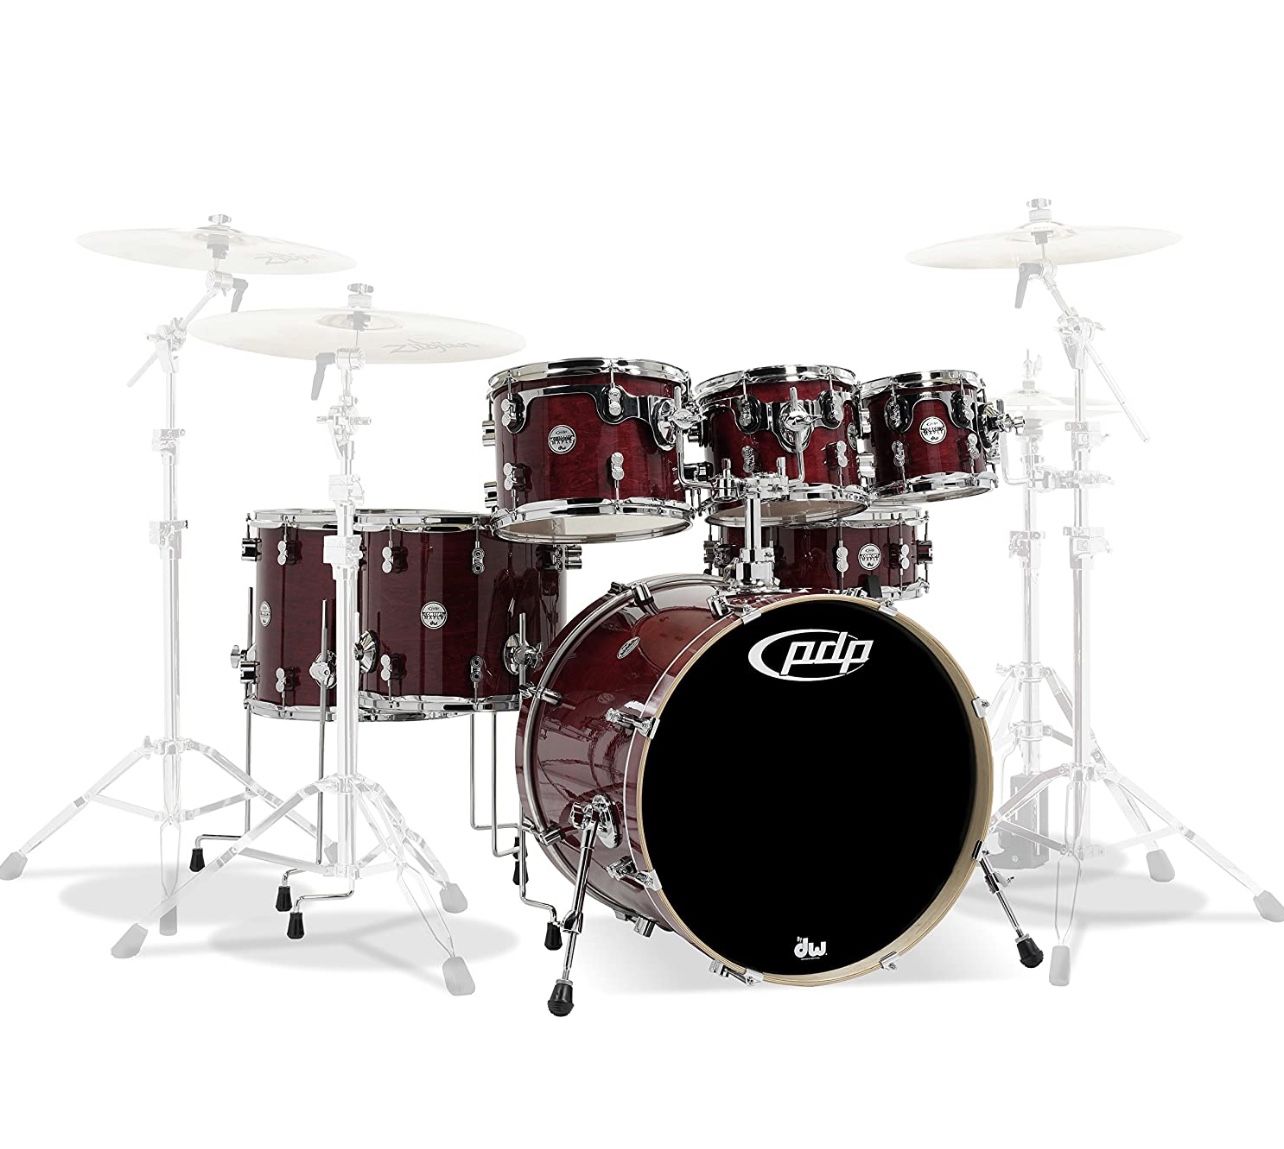 7 piece PDP Maple Drum Set in Cherry Stain Laquer